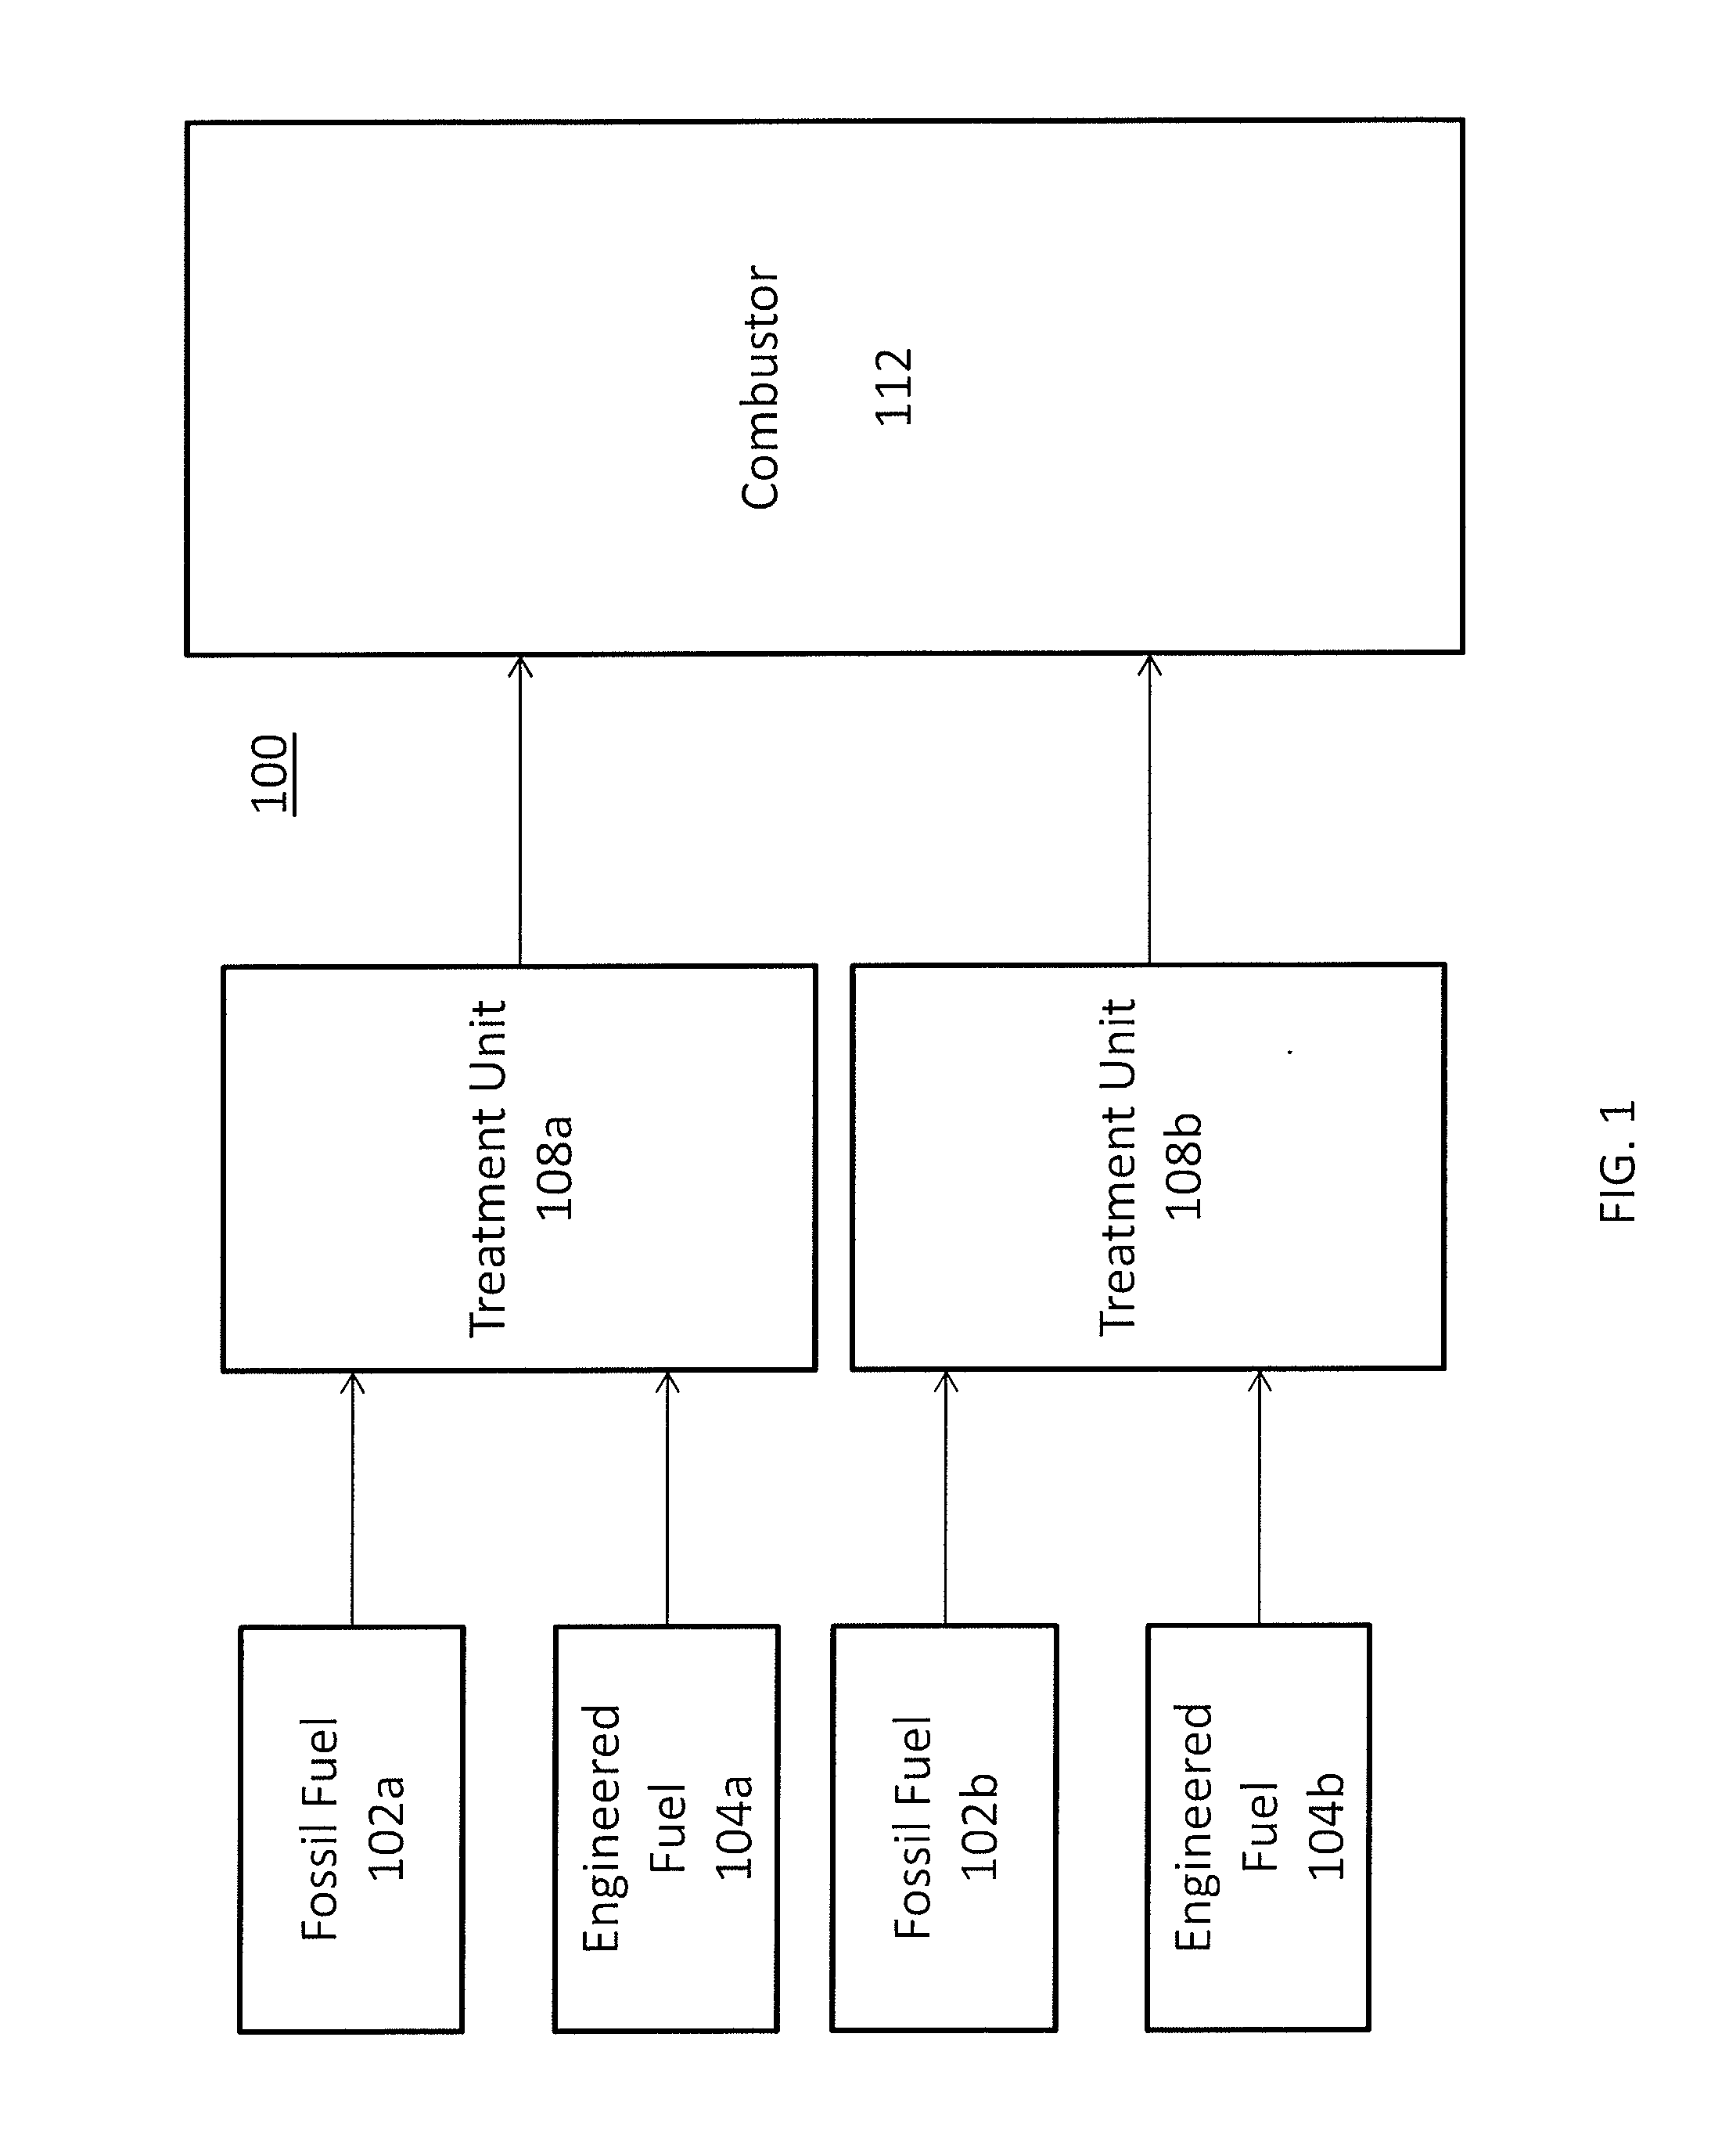 Process for cogasifying and cofiring engineered fuel with coal